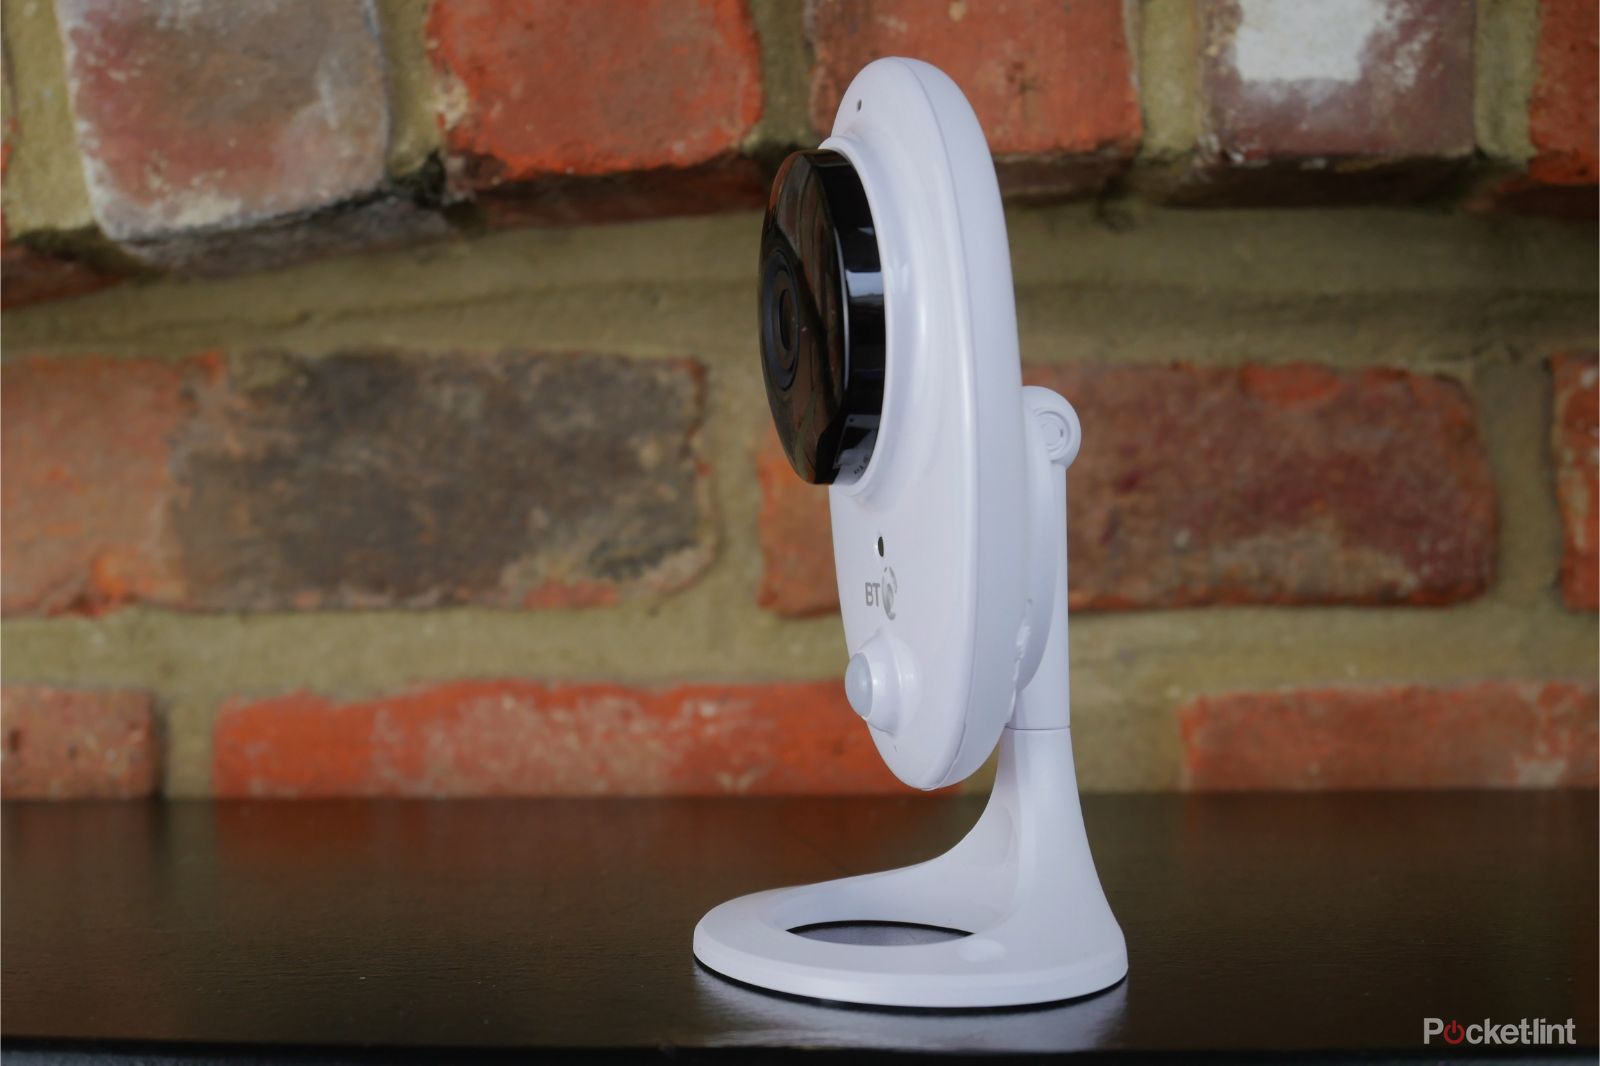 BT Smart home camera review An affordable but flawed smart home security device image 4